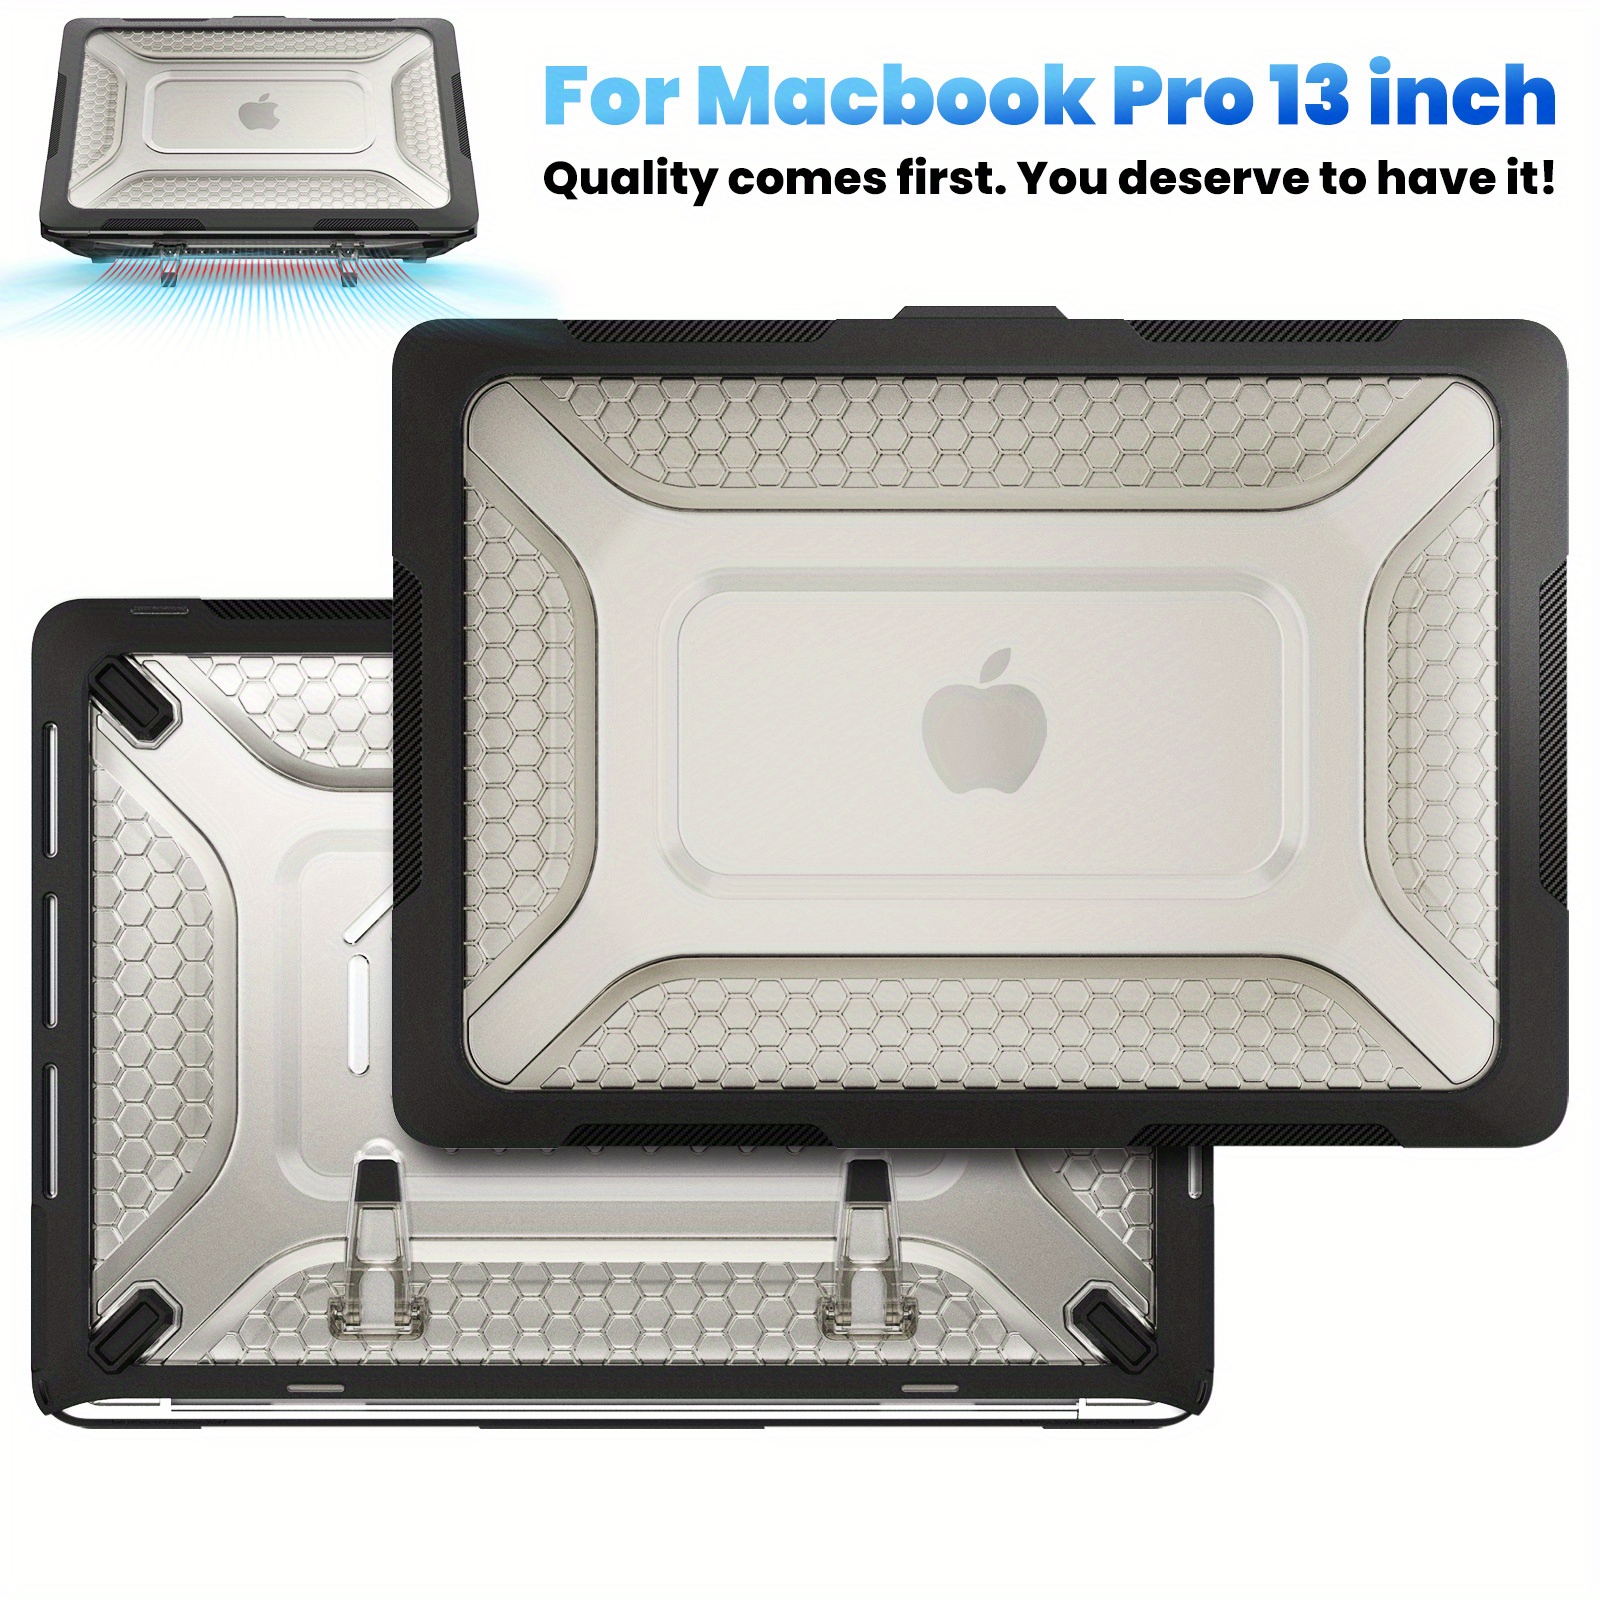 Case For Macbook Pro, Built-in Foldable Stand & Cooling Vents Case